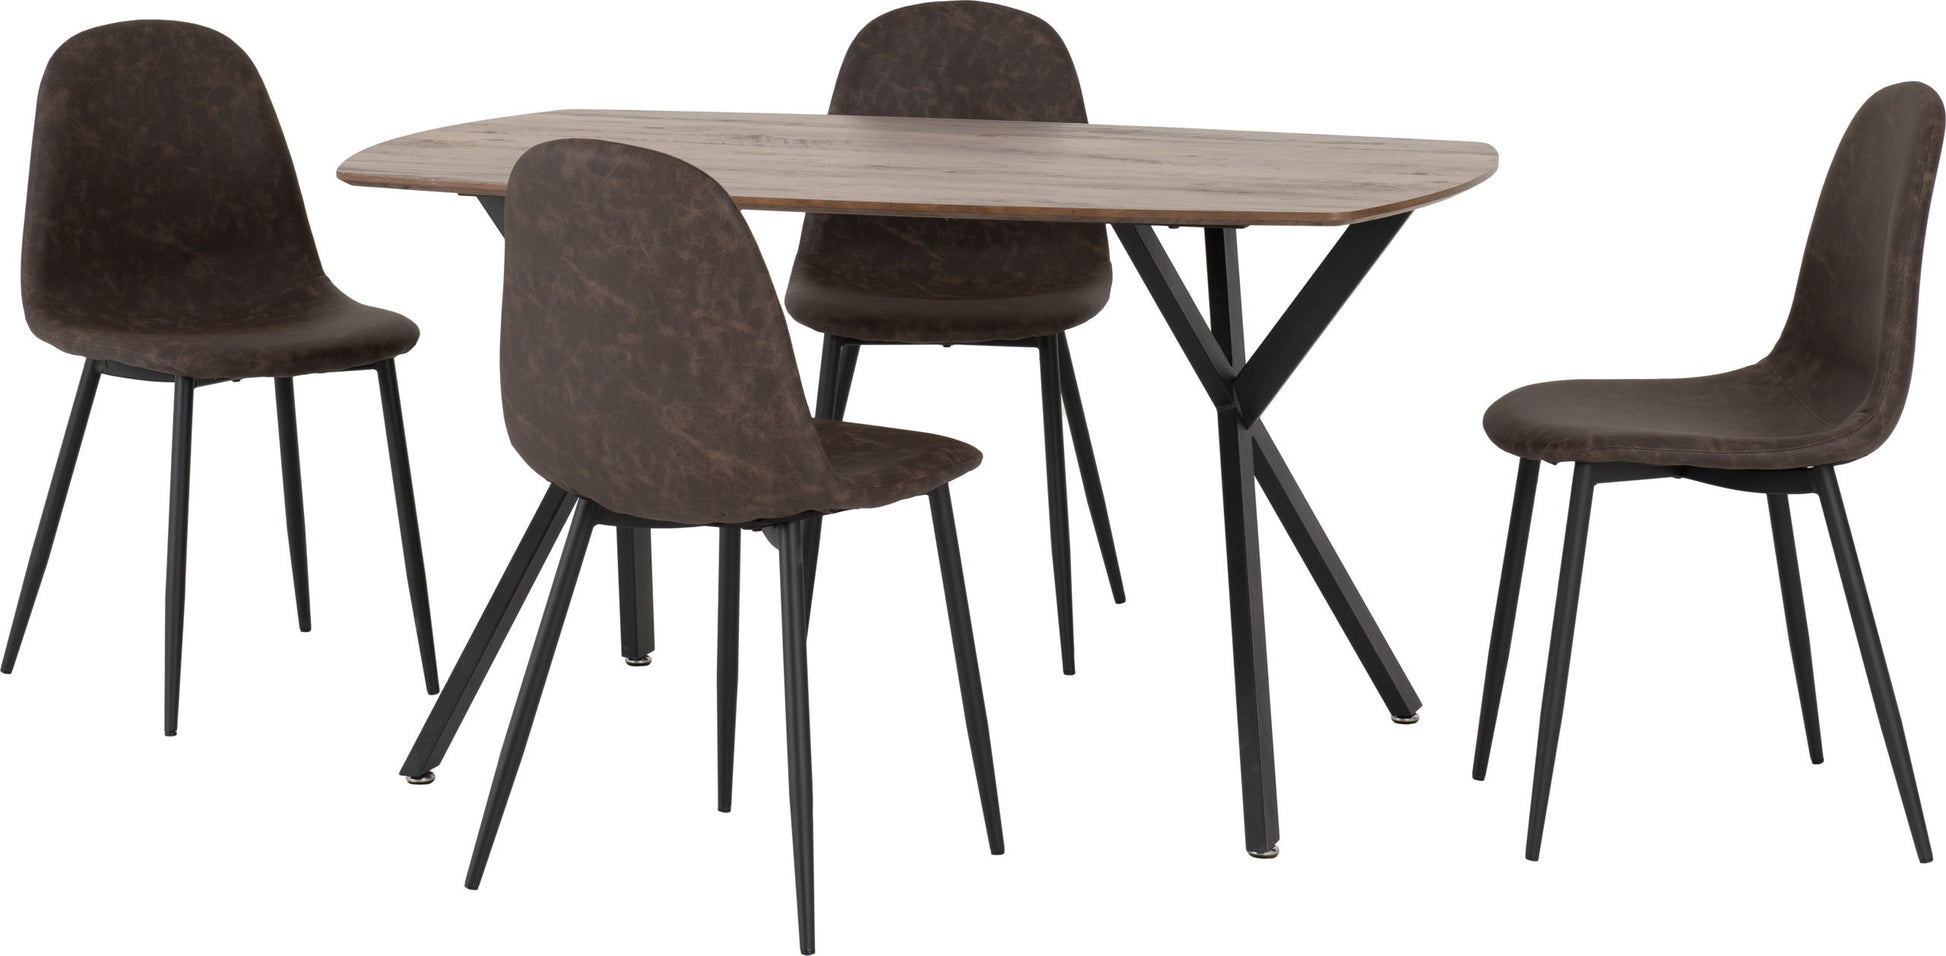 Athens Rectangular Dining Set Medium Oak Effect/Black/Brown Faux Leather- The Right Buy Store